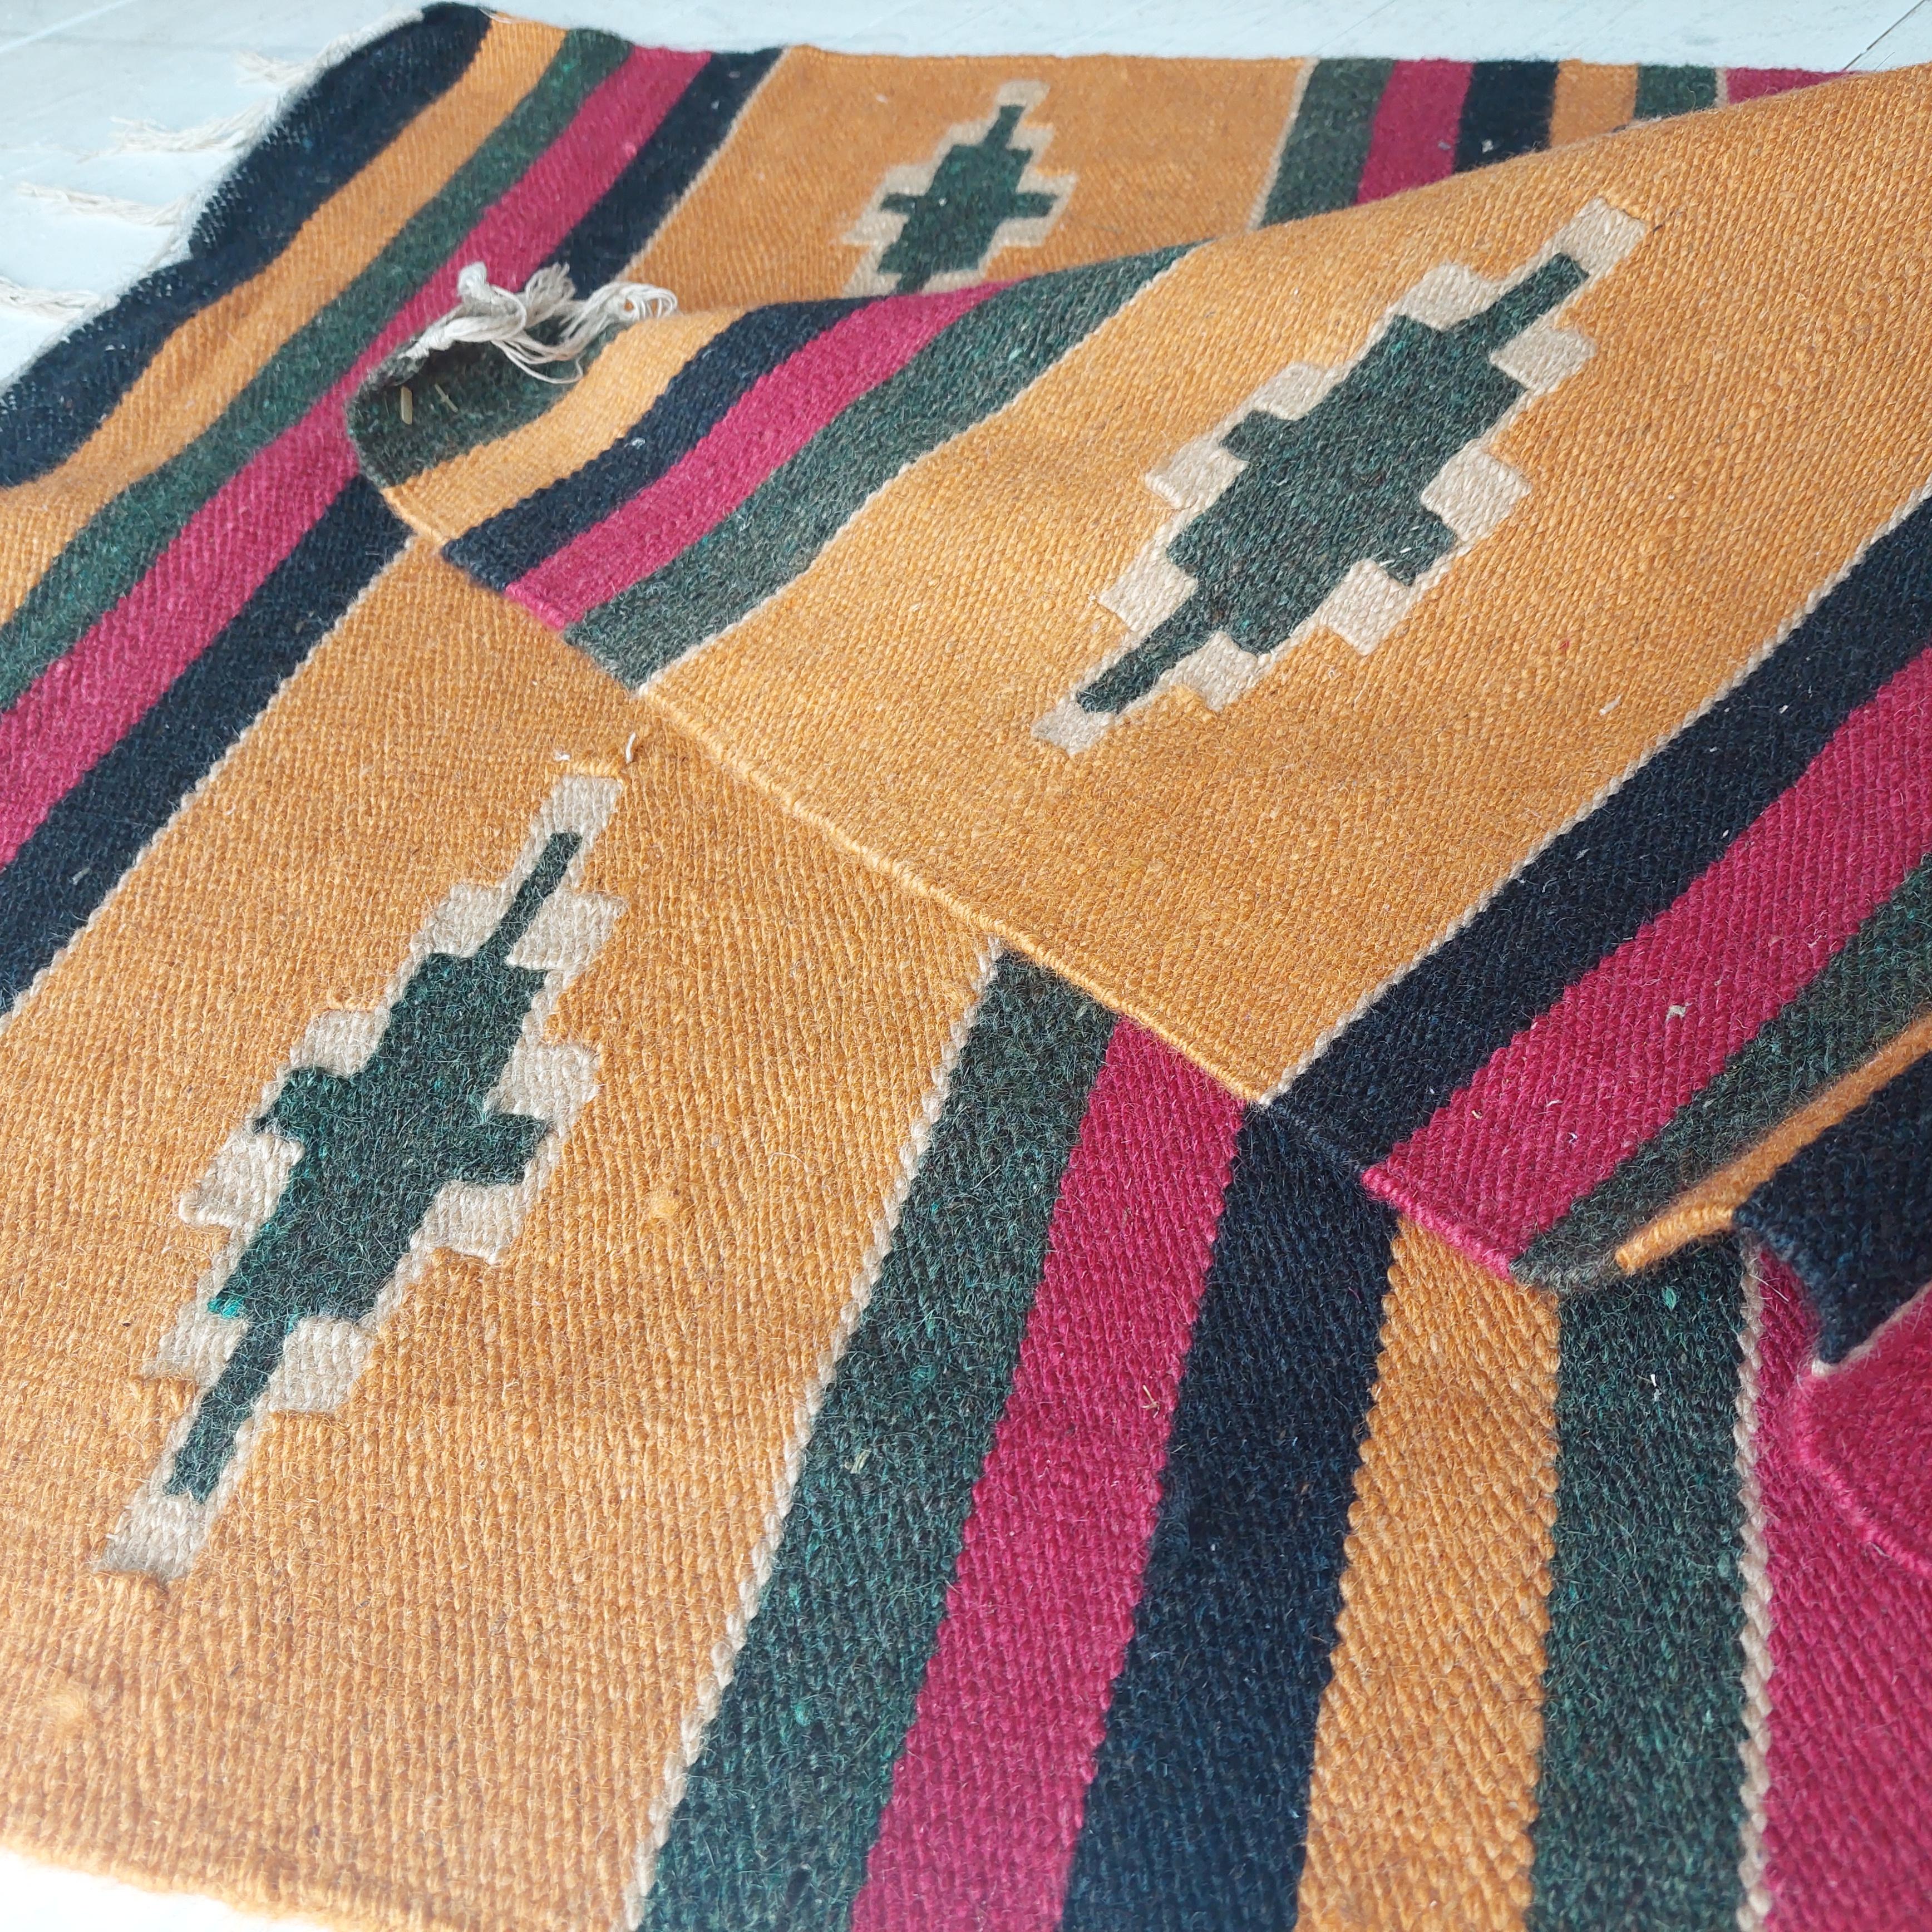 Vintage Traditional Turkish Kilim Rug Anatolian Stripped Kelim, 138 X 69 In Good Condition For Sale In Leamington Spa, GB